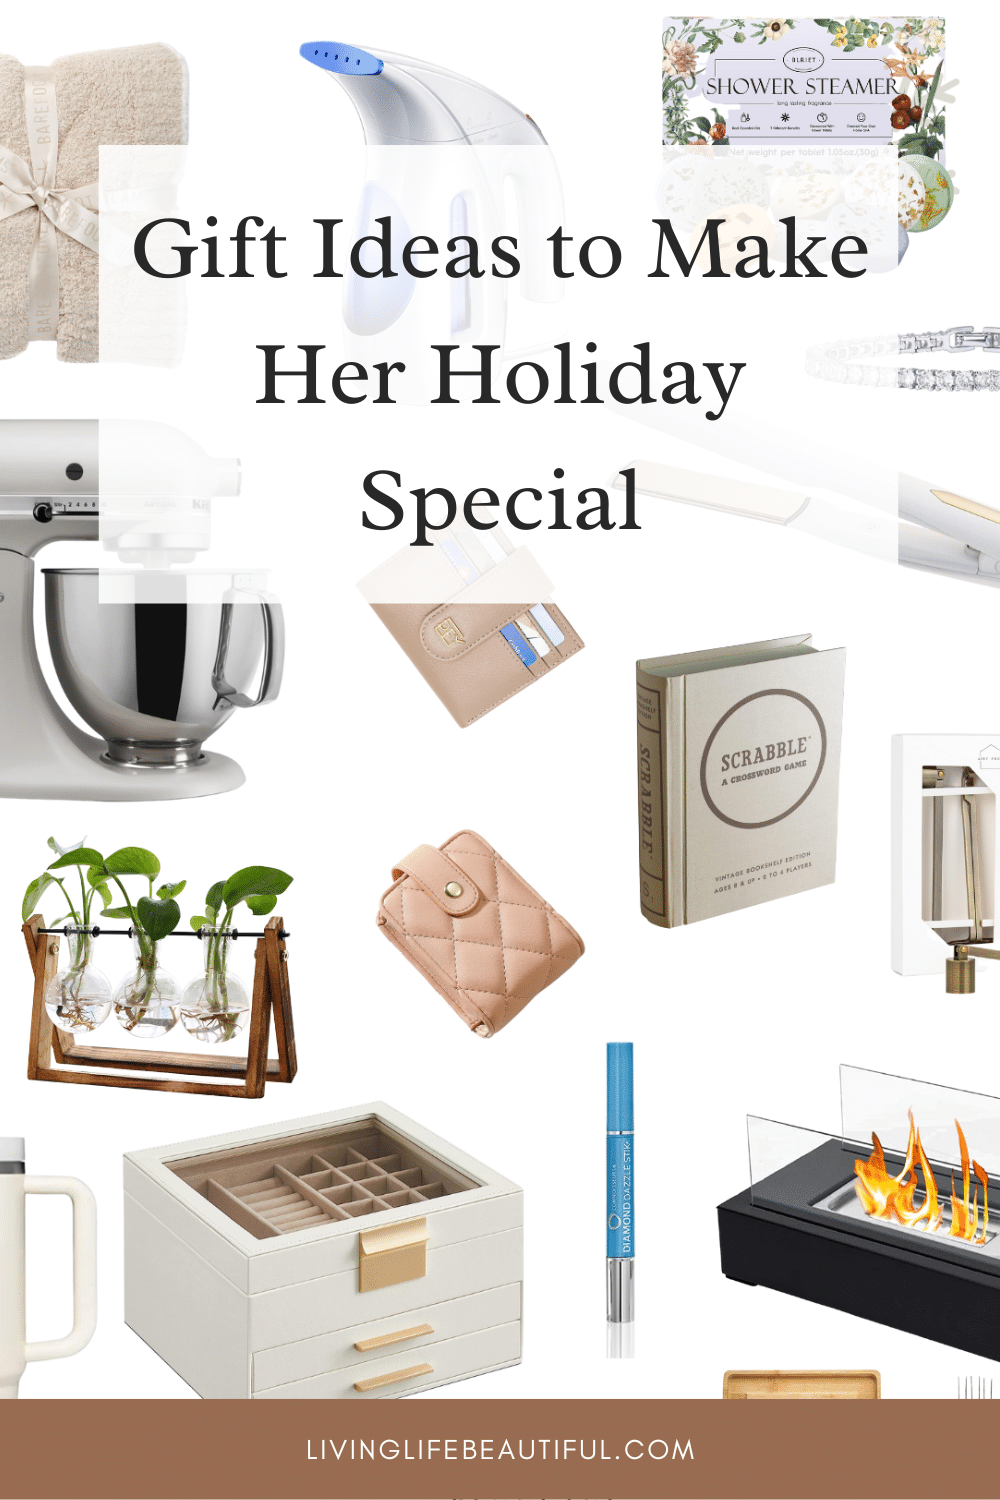 Gift Ideas to Make Her Holiday Special